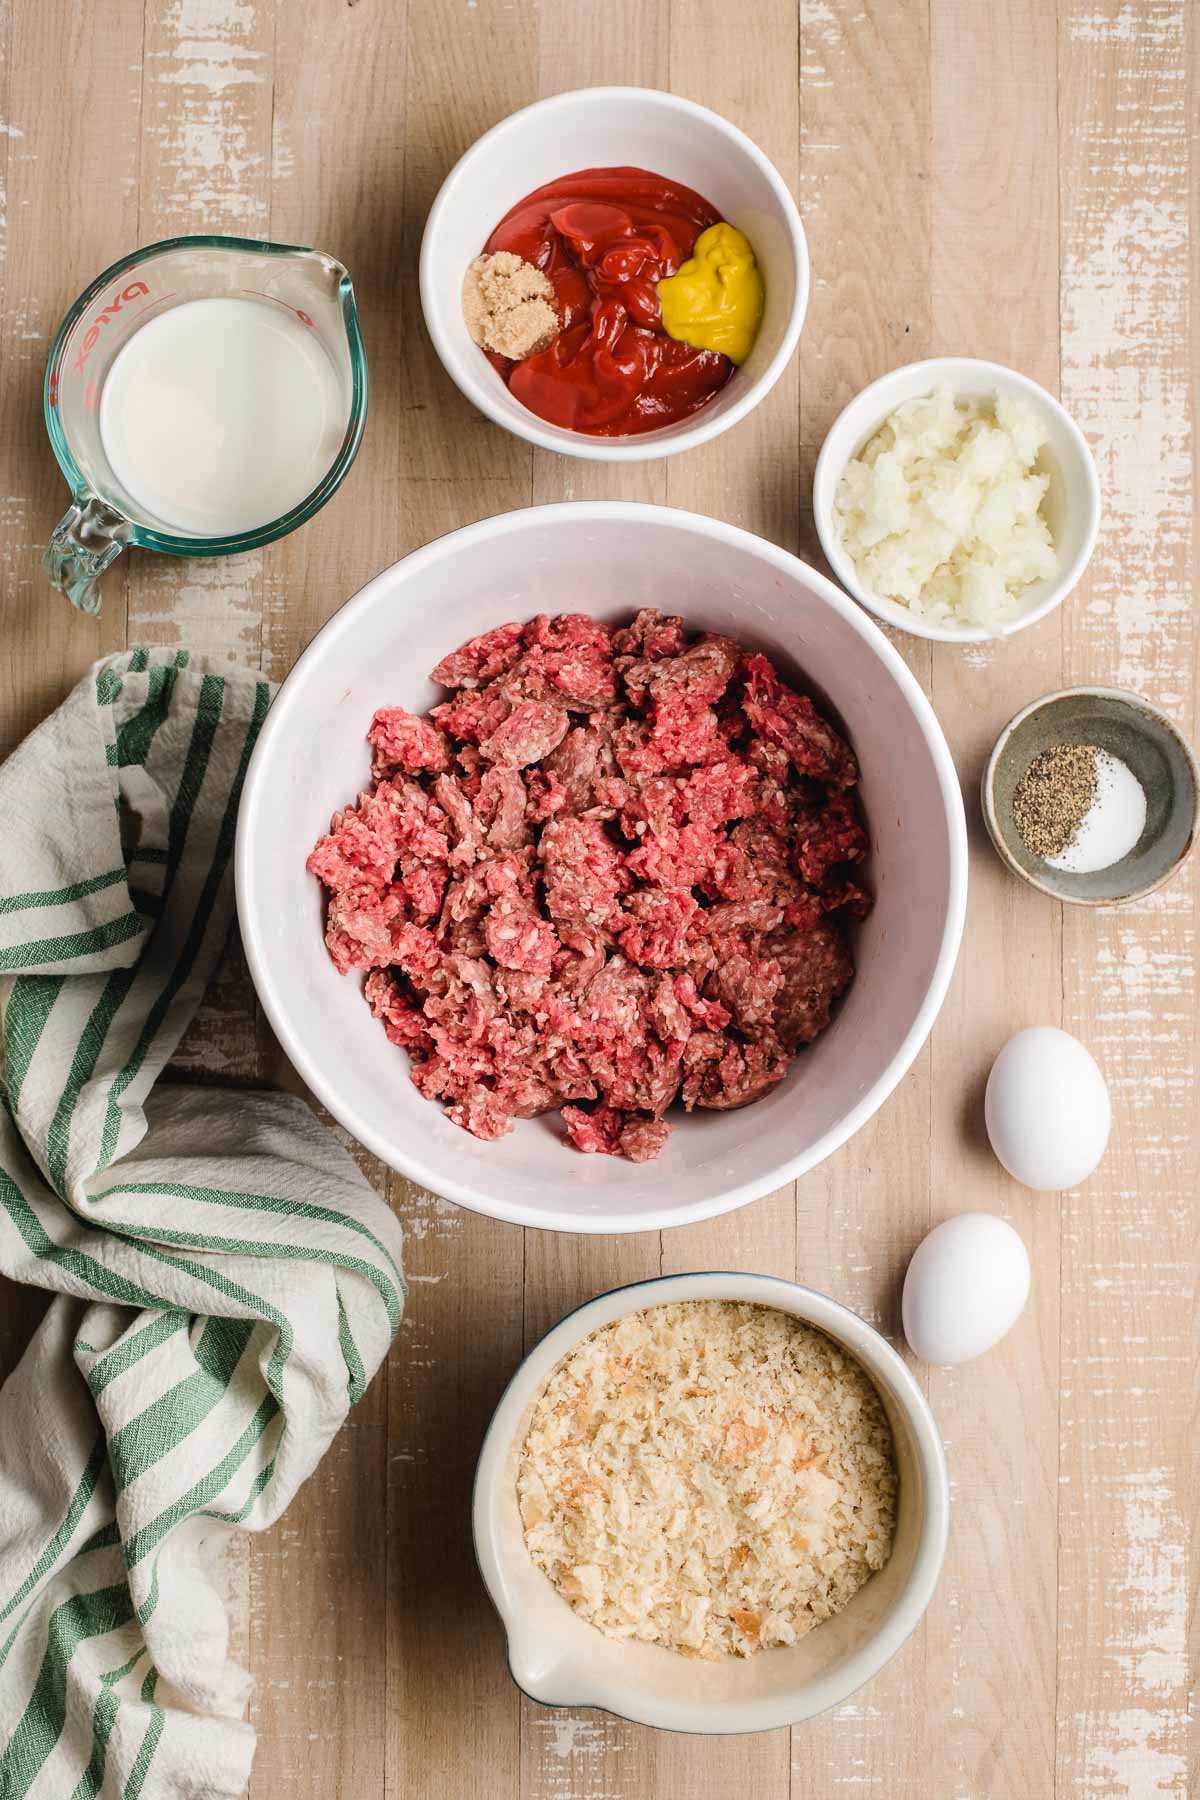 Ingredients for meatloaf displayed in small bowls- ground beef, diced onions, eggs, breadcrumbs, milk, ketchup, and mustard.